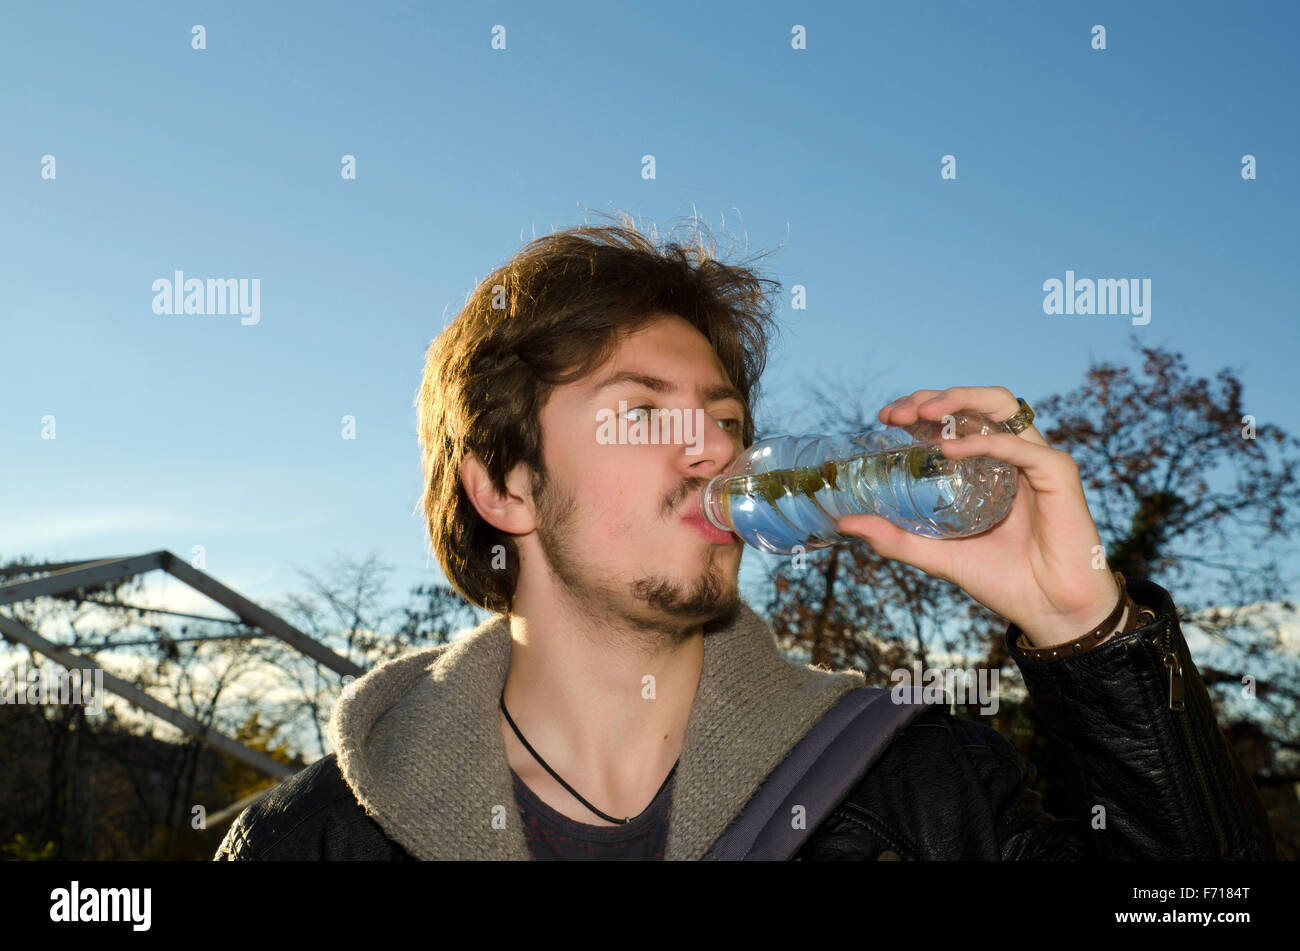 Teenager drinking mineral water in a bottle in a park Stock Photo